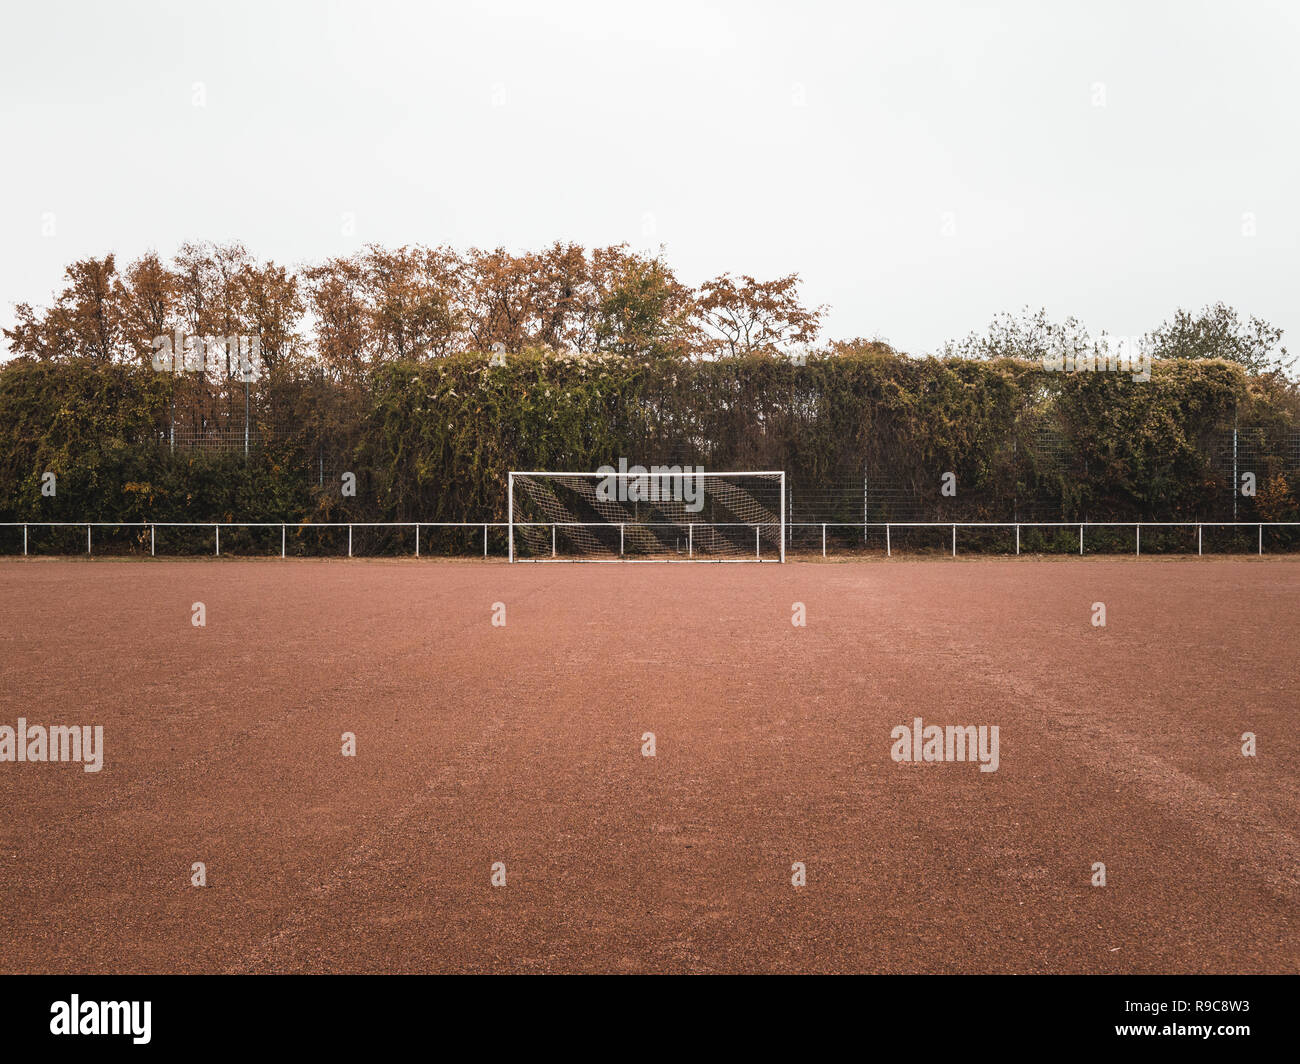 Symmetrical shot of a Rural Cinder soccer pitch in Germany Stock Photo